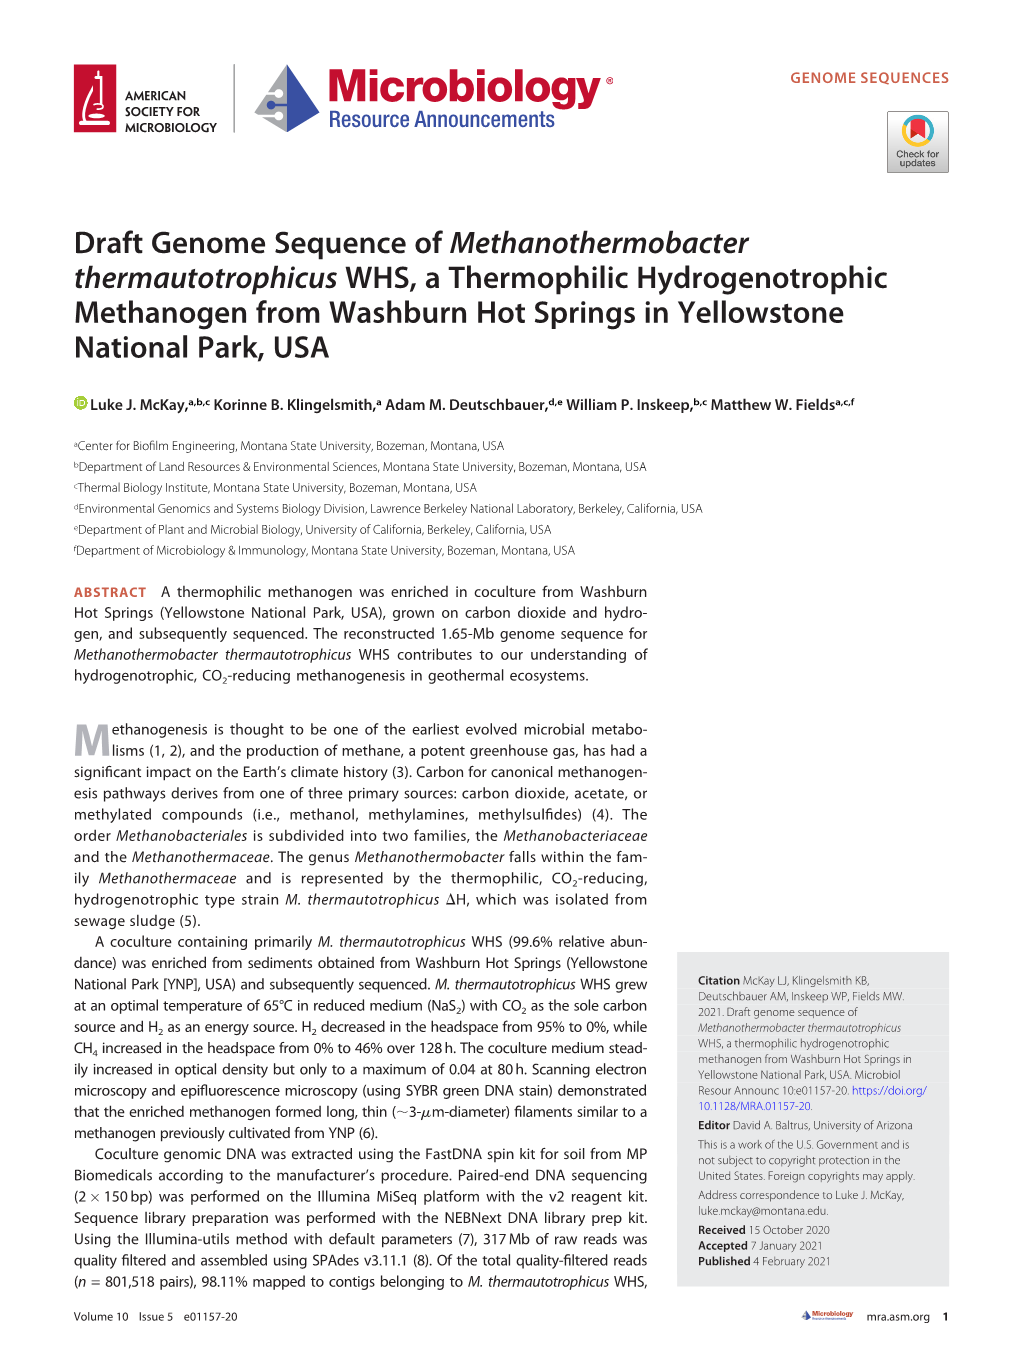 Draft Genome Sequence of Methanothermobacter